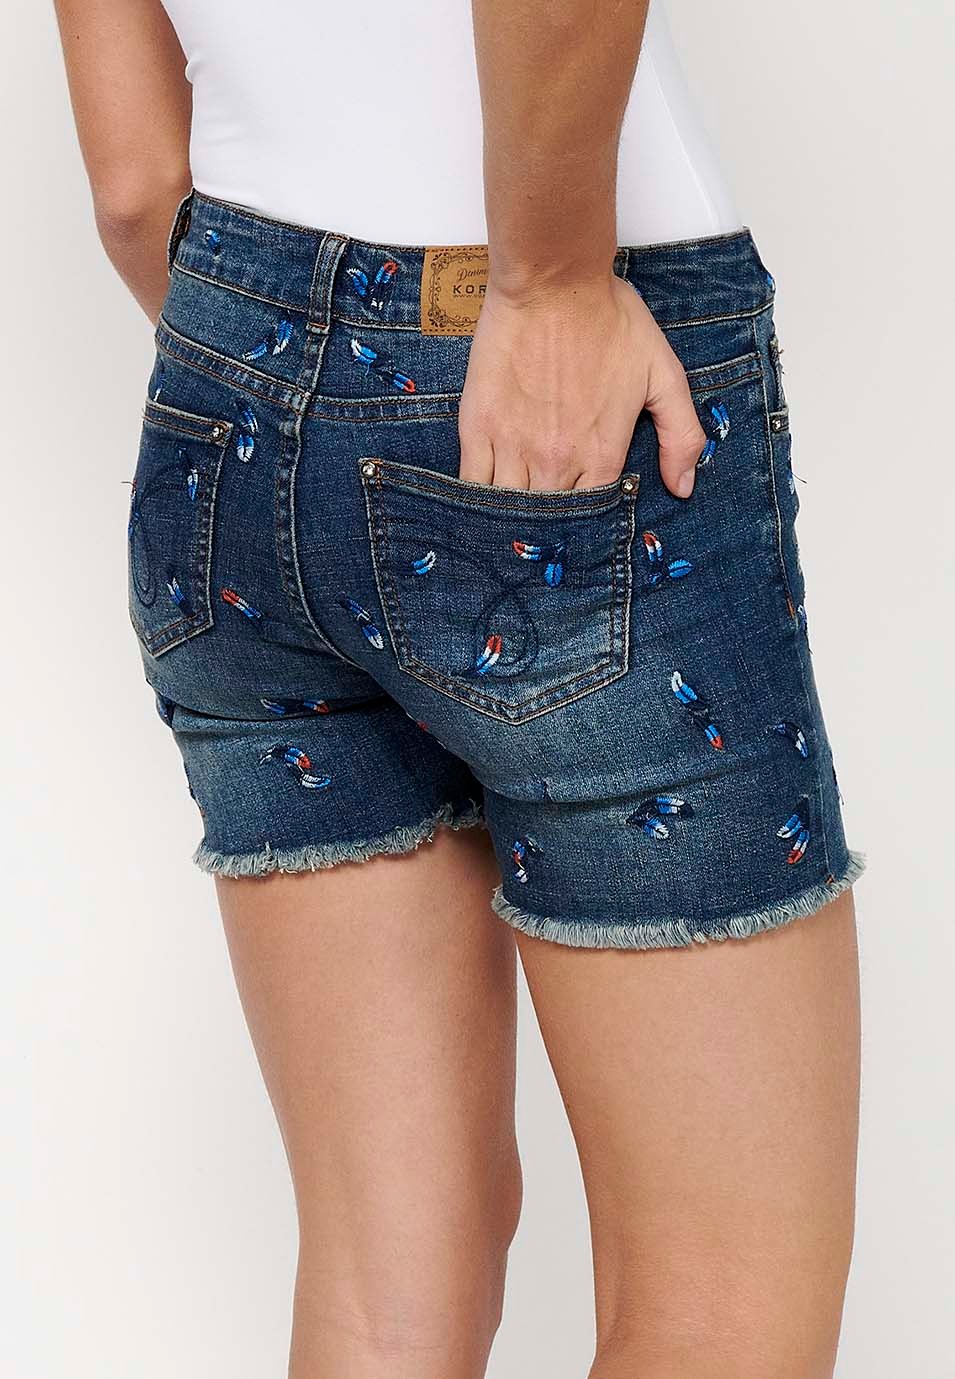 Denim shorts with front zipper and button closure and embroidered fabric with five pockets, one blue pocket pocket for women 6